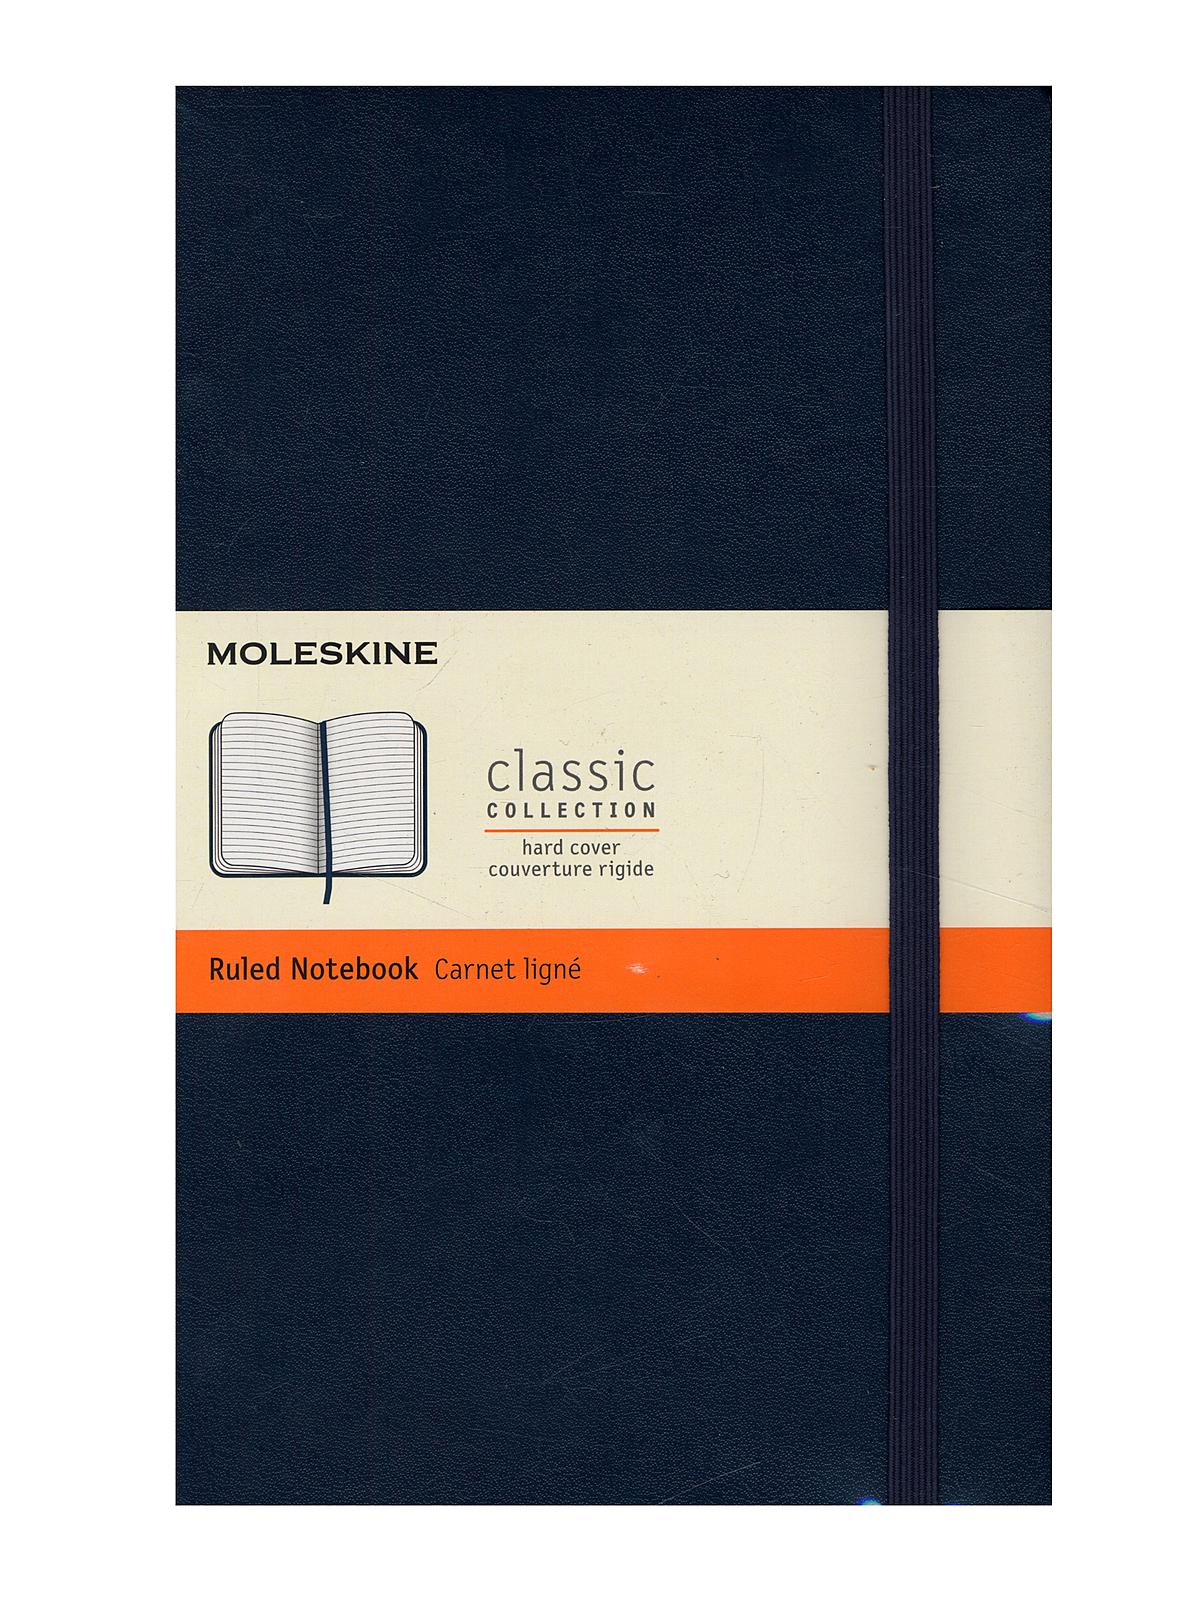 Classic Hard Cover Notebooks Sapphire Blue 5 In. X 8 1 4 In. 240 Pages, Lined